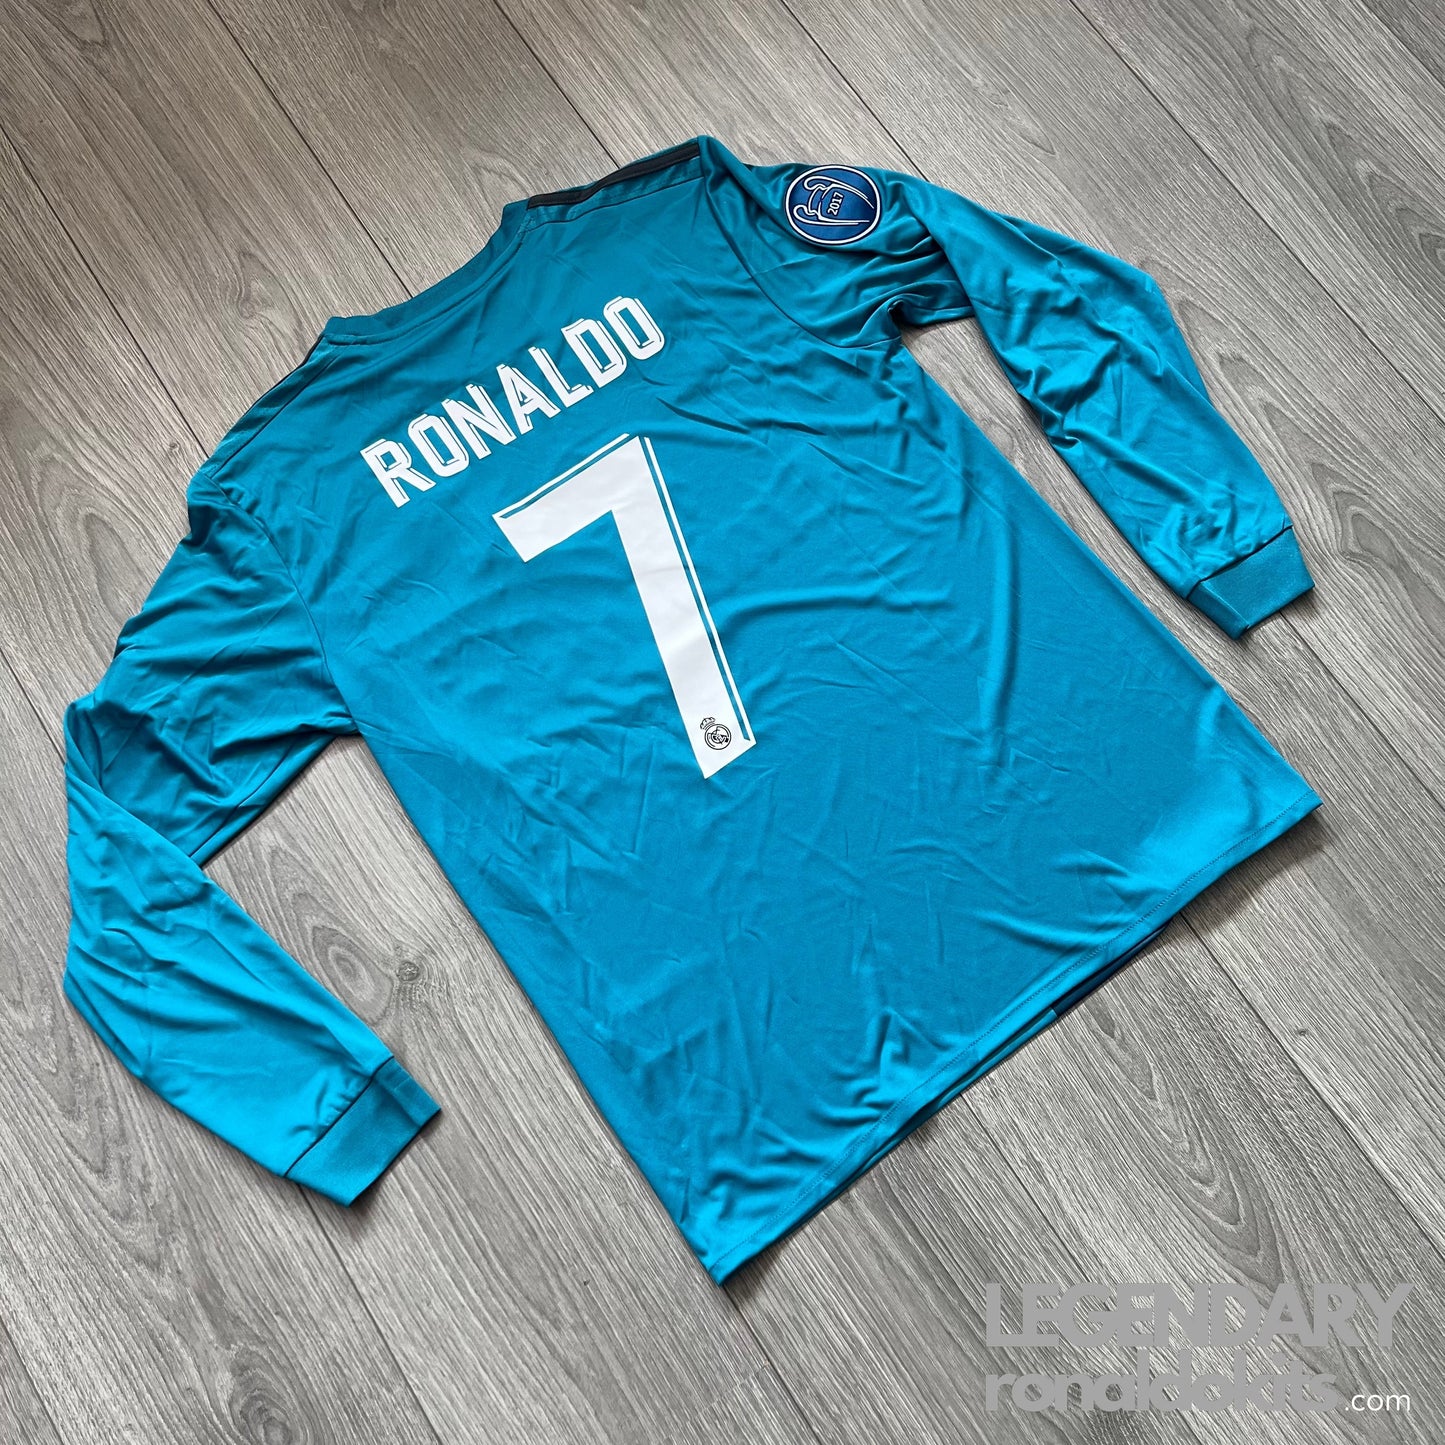 Real Madrid 2017/18 Champions League Jersey